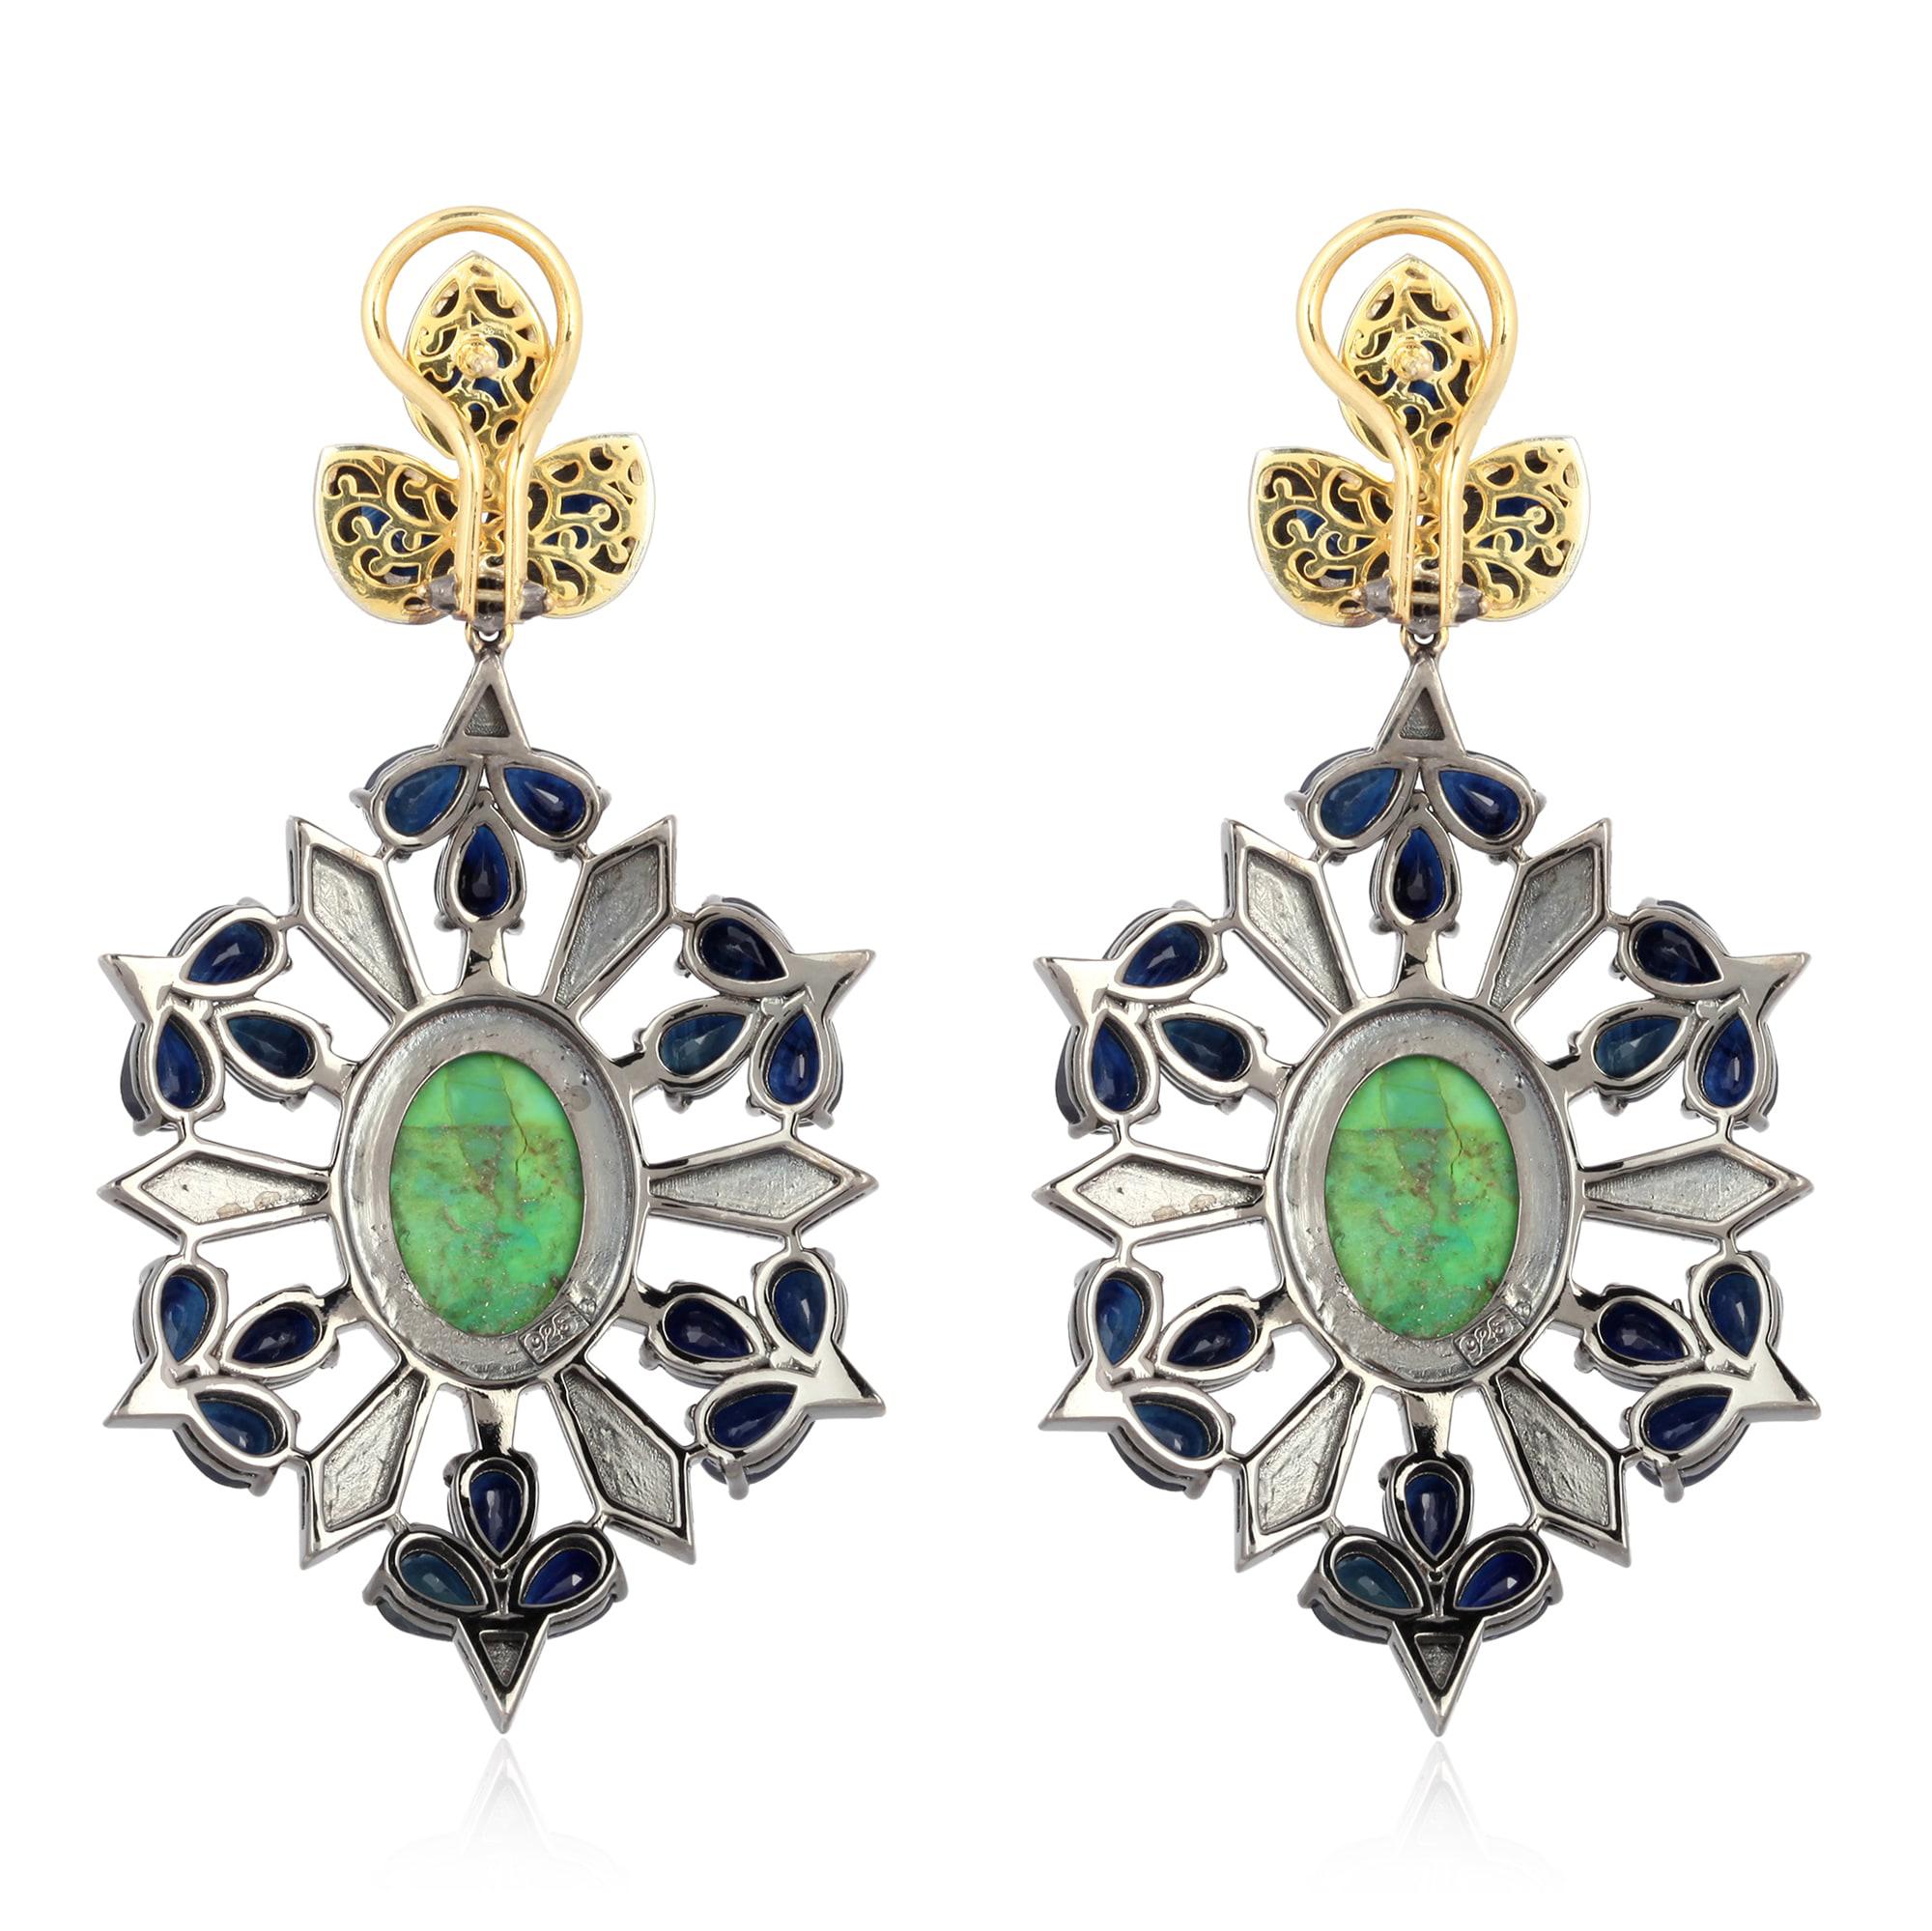 Cast in 18-karat gold & sterling silver, these stunning drop earrings are set with 20.33 carats blue sapphire, 6.3 carats turquoise and 2.67 carats of sparkling diamonds. 

FOLLOW  MEGHNA JEWELS storefront to view the latest collection & exclusive